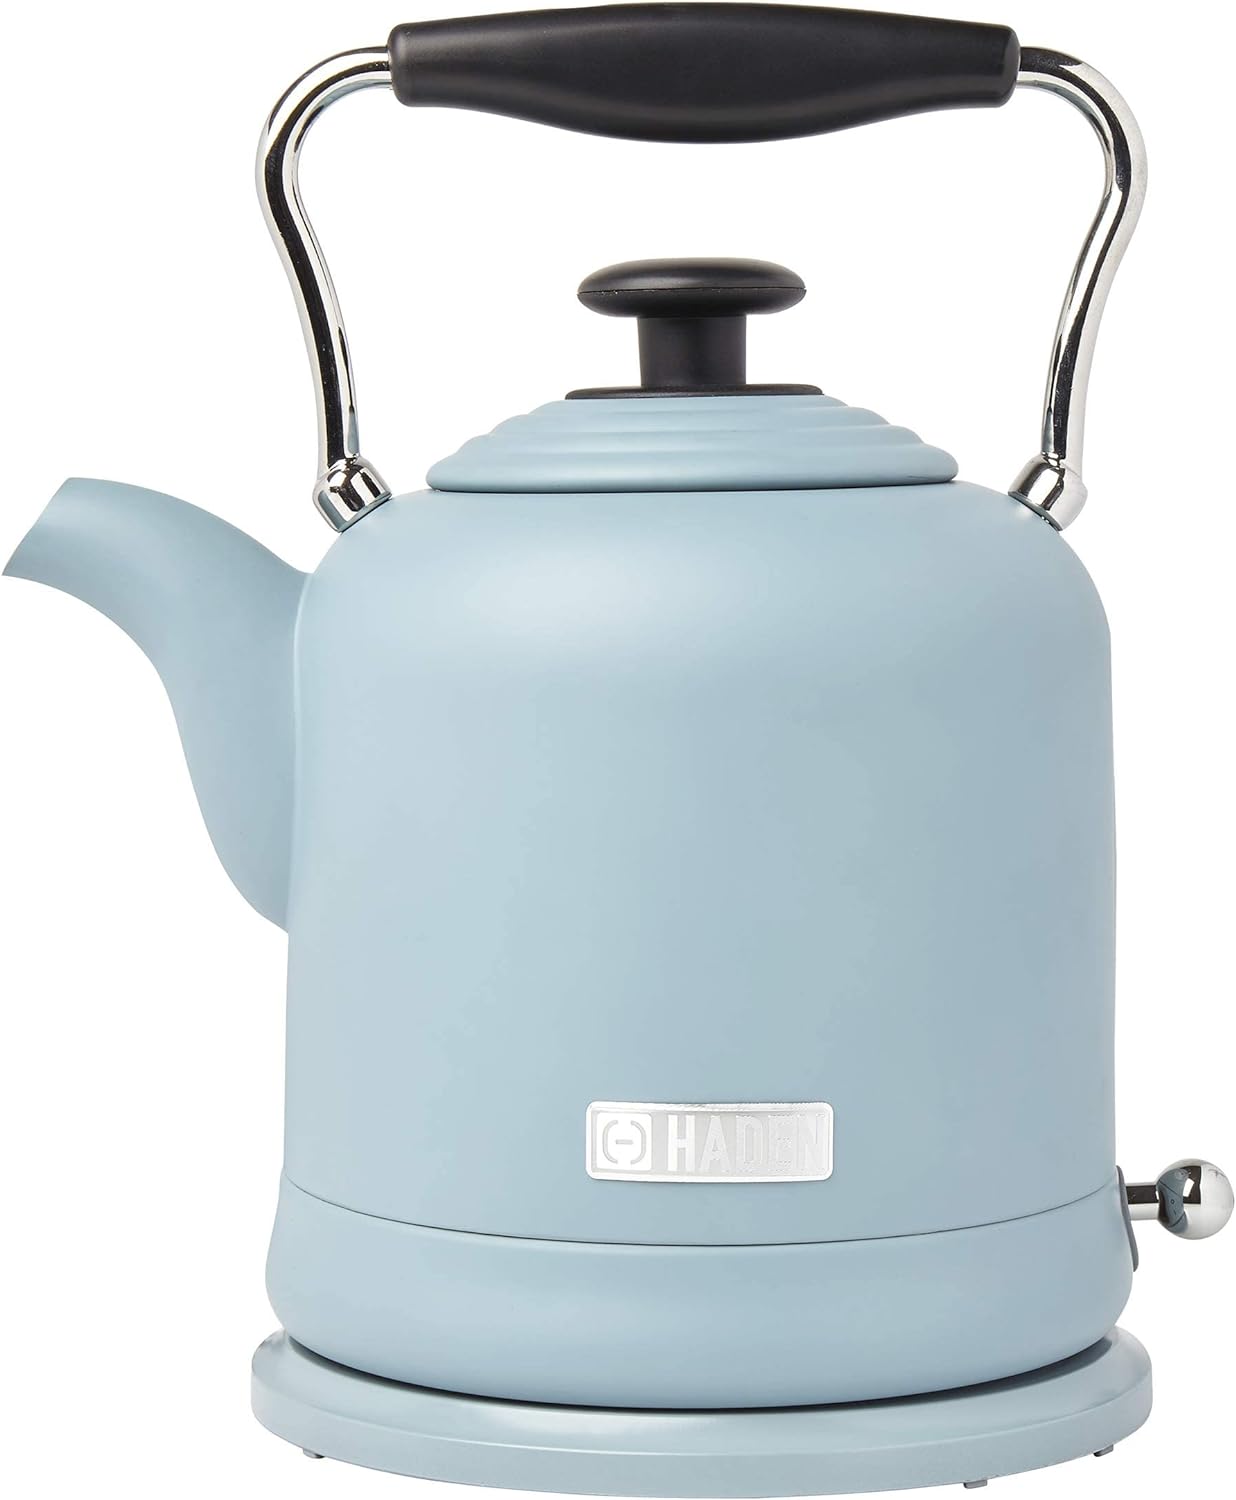 Haden 75025 HIGHCLERE Vintage Retro 1.5 Liter/6 Cup Capacity Innovative  Cordless Electric Stainless Steel Tea Pot Kettle with 360 Degree Base, Pool  Blue